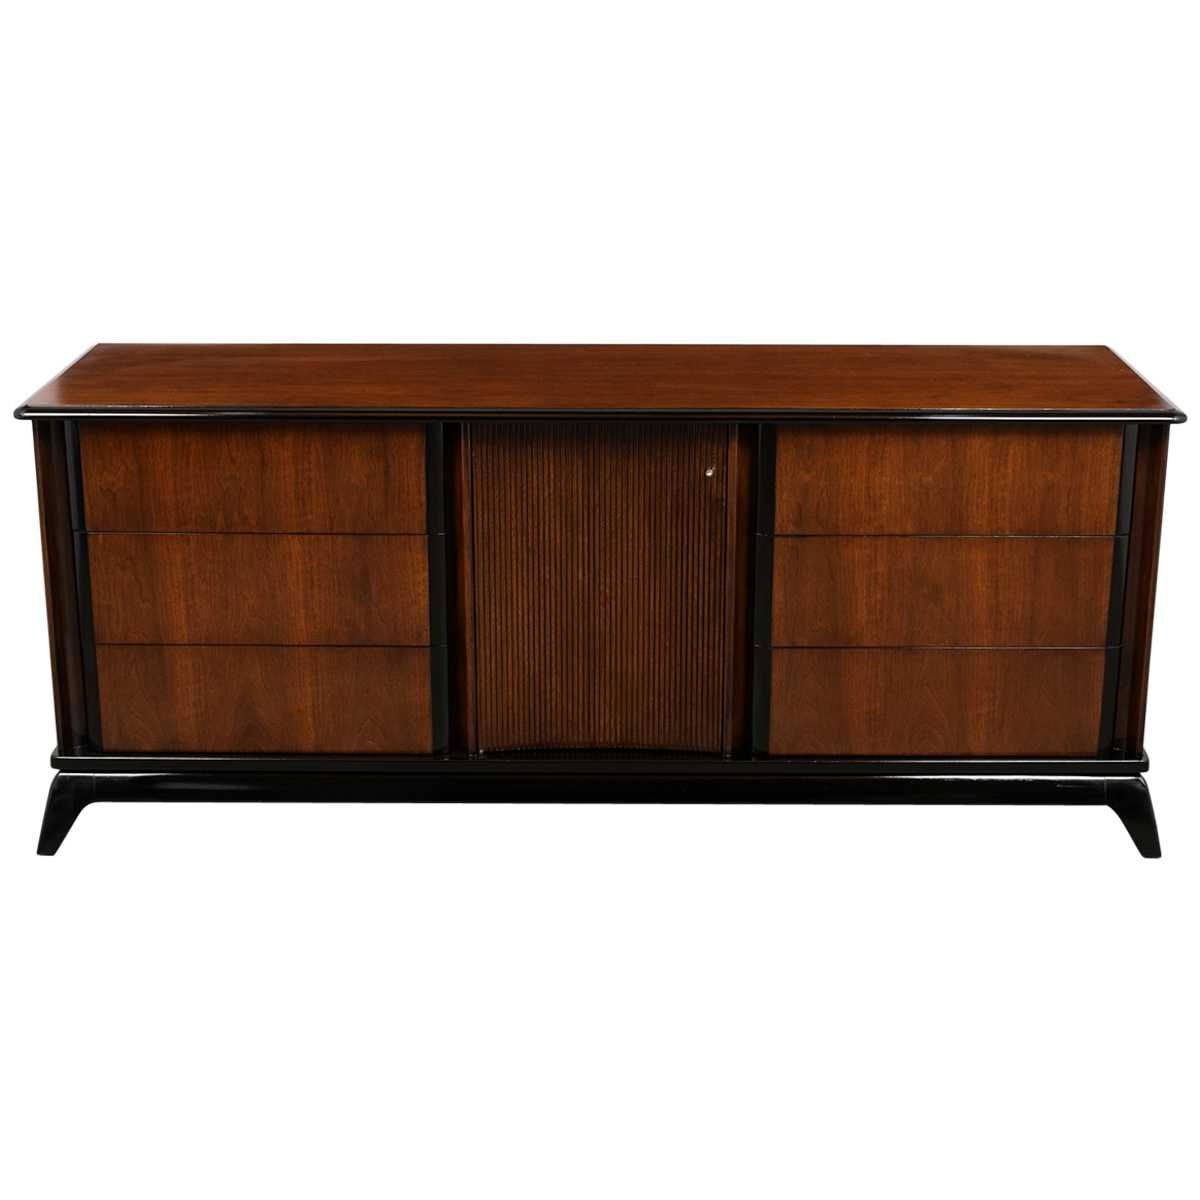 Fashionable Six Drawer Sideboard Inside Seiling Sideboards (View 11 of 20)